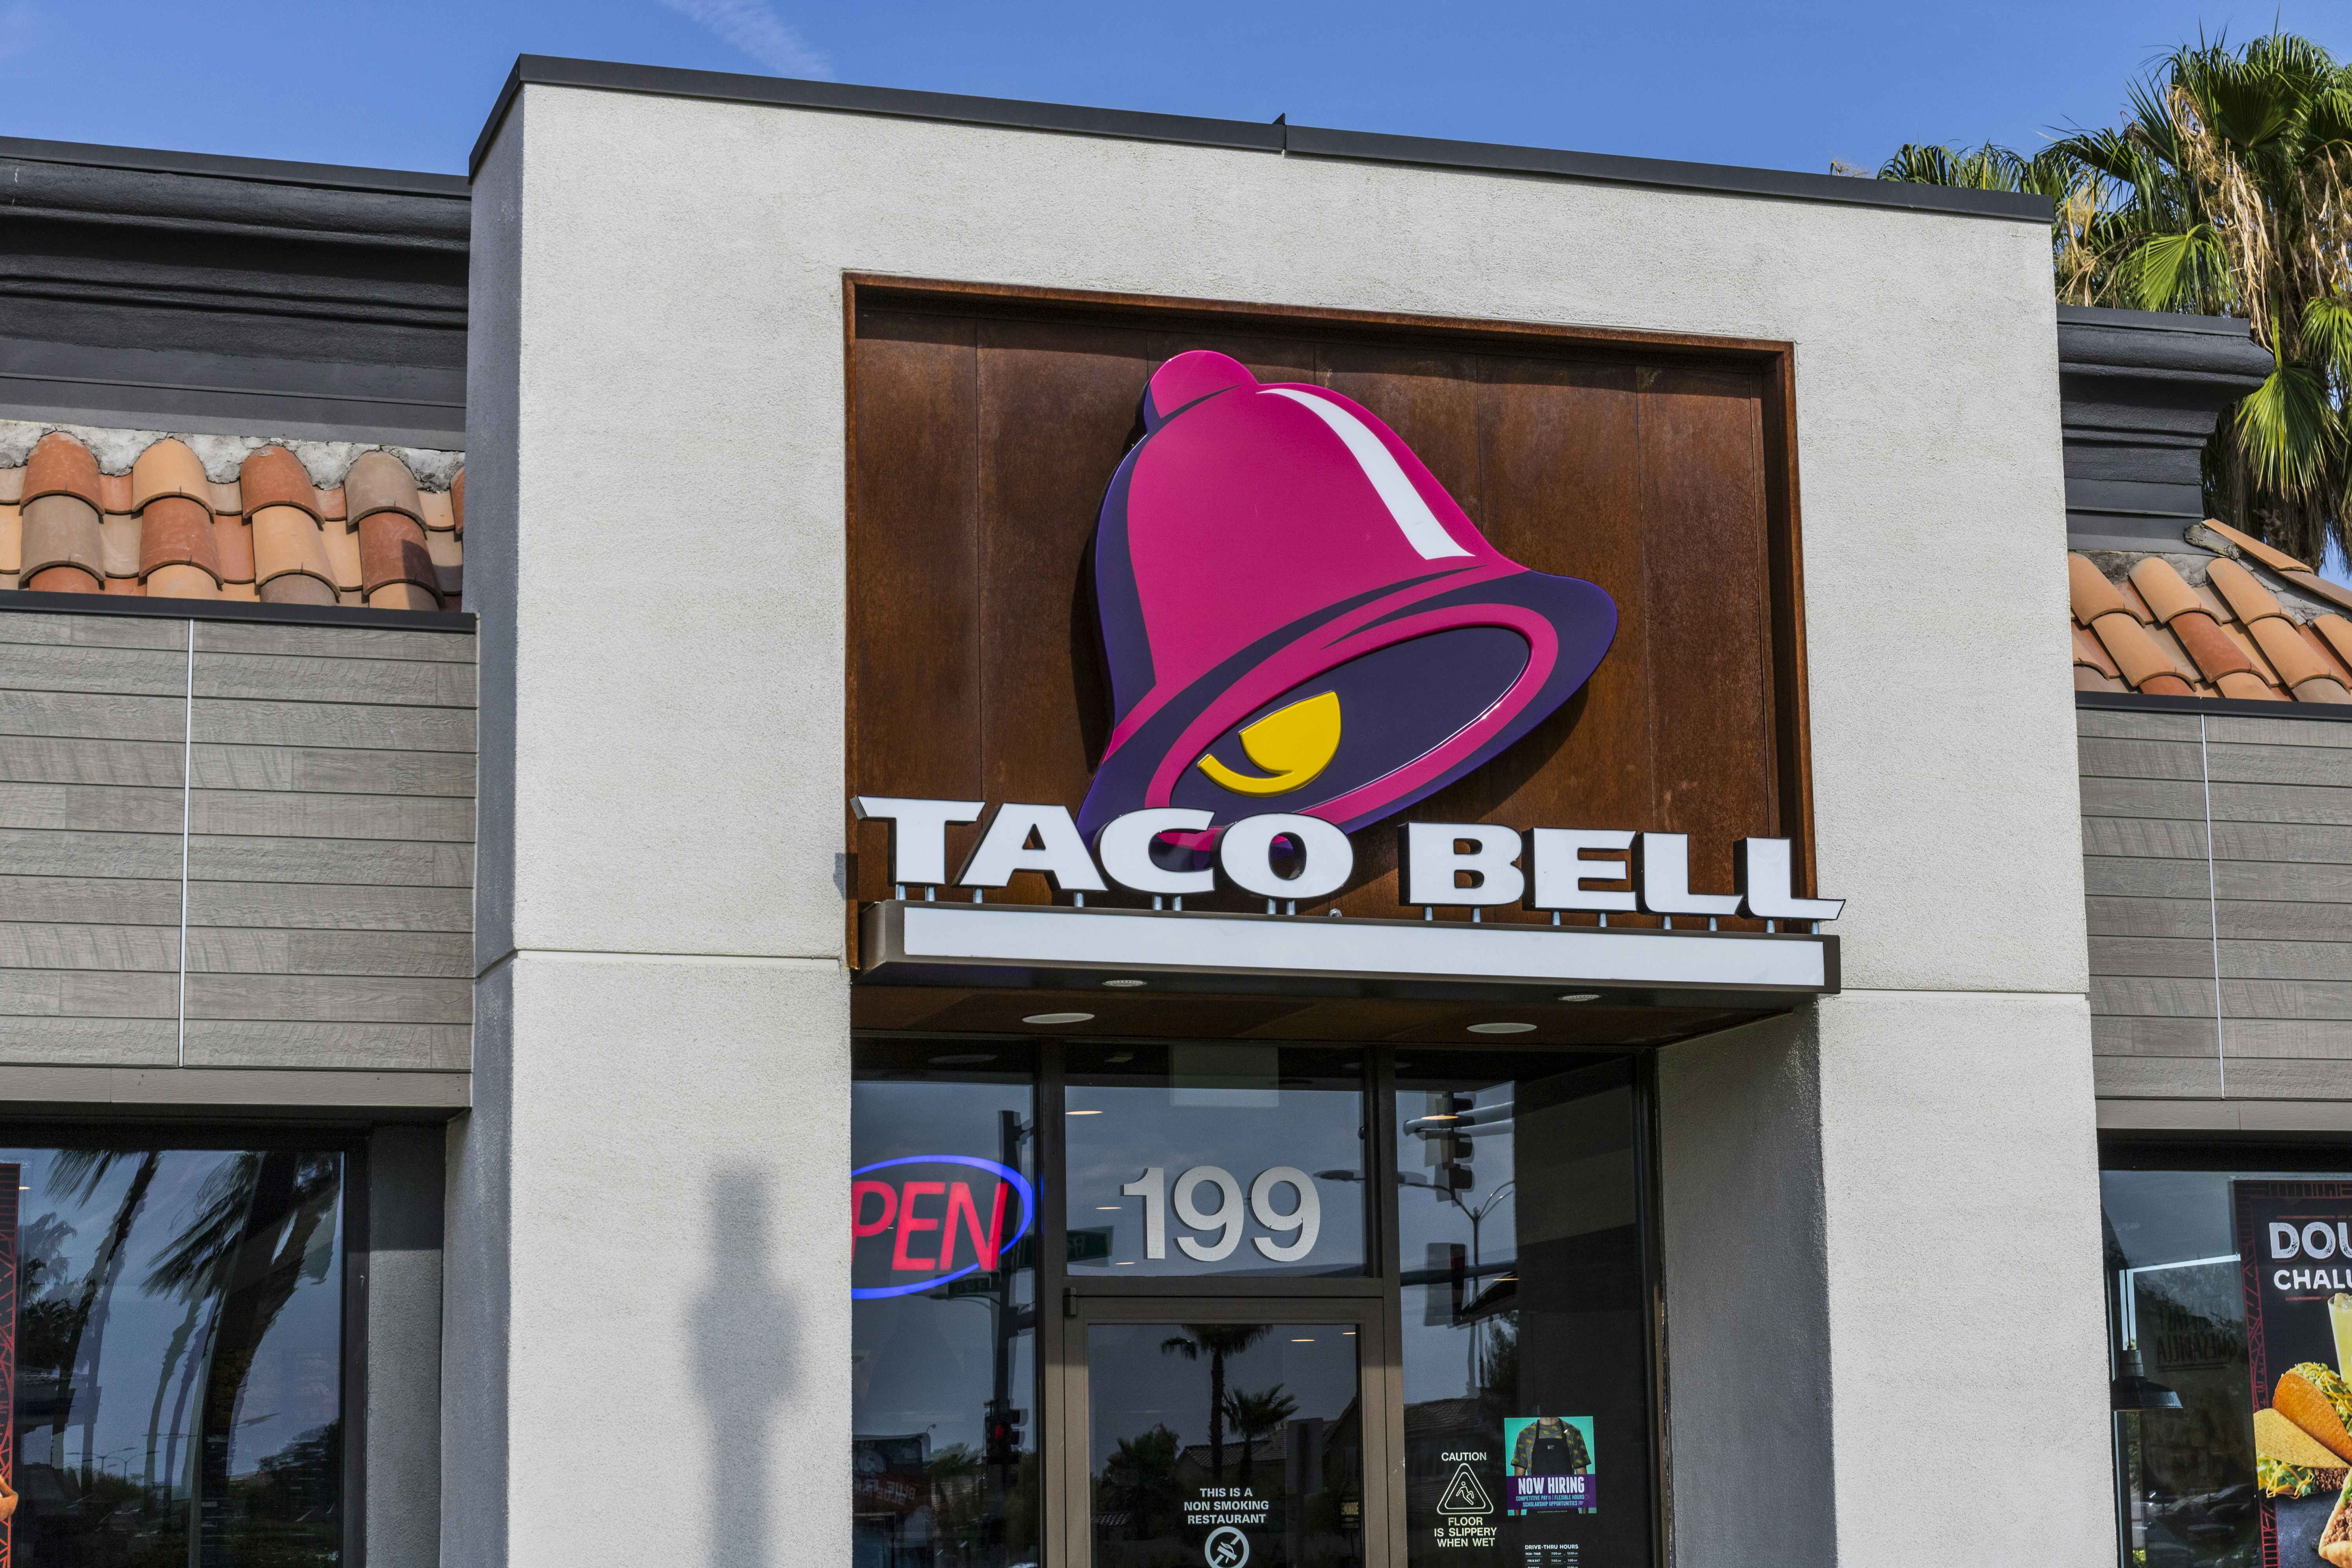 A Taco Bell restaurant storefront and sign.